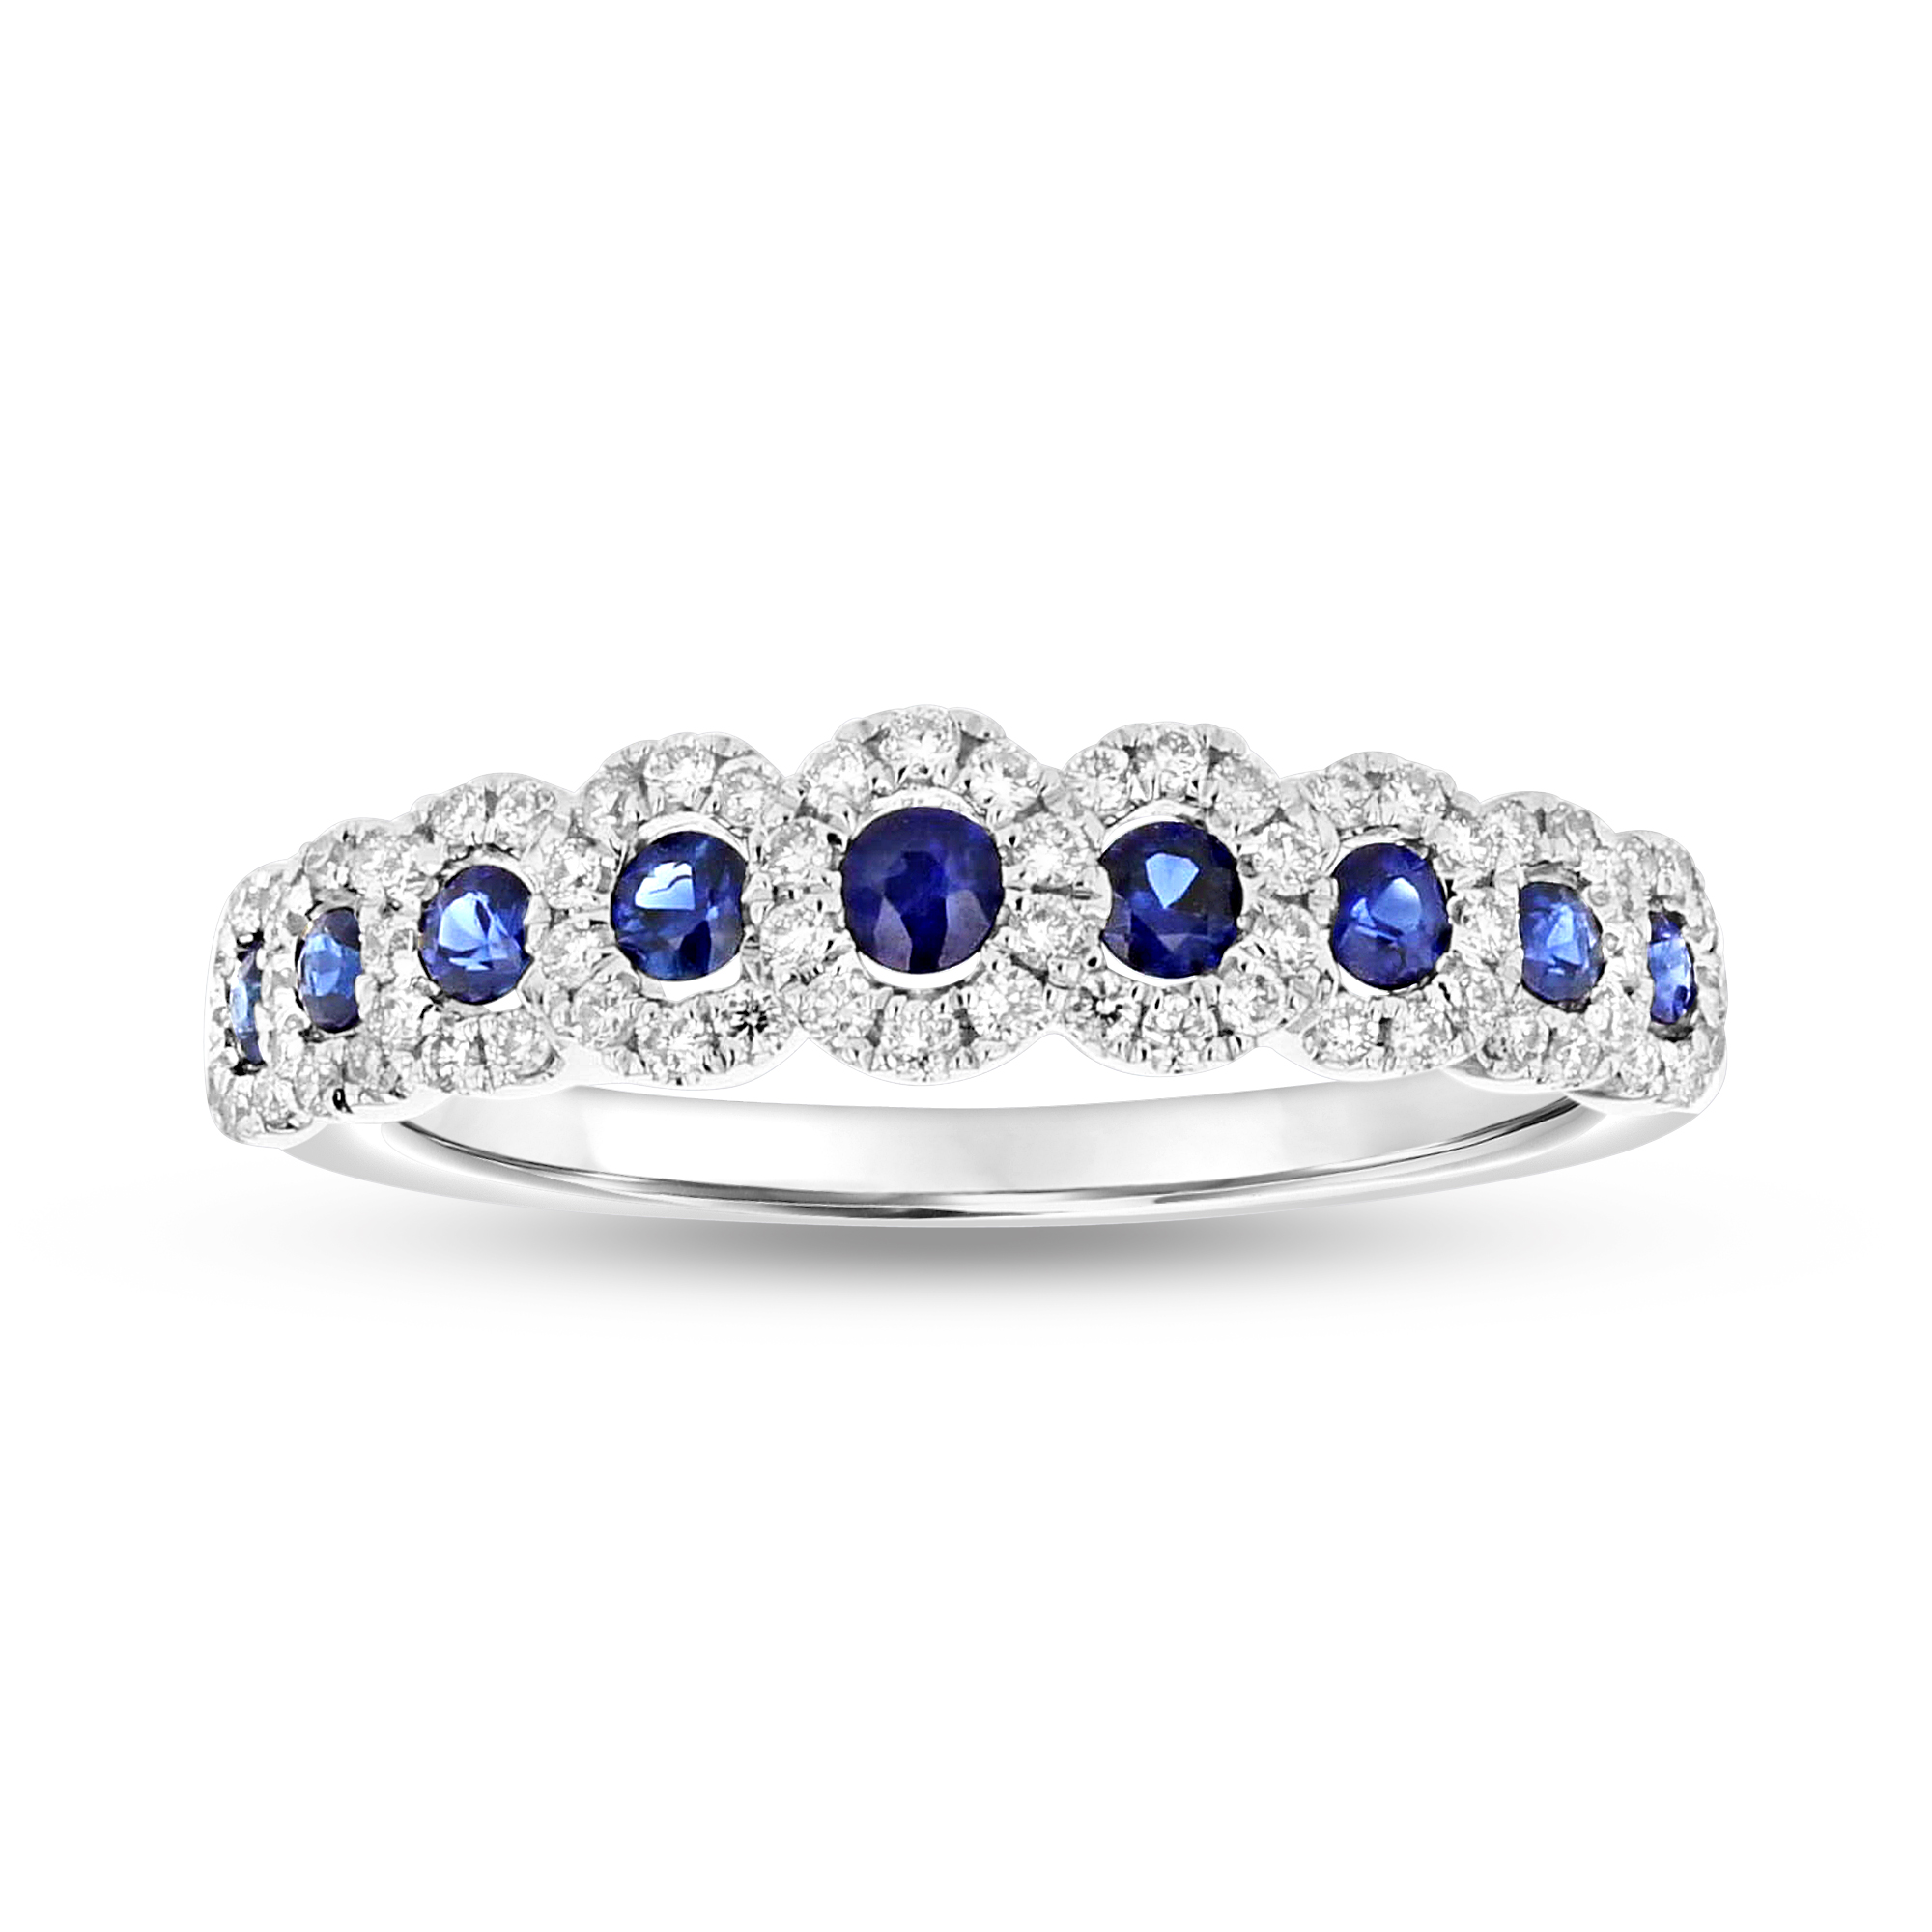 View 0.25ctw Diamond and Sapphire Band in 18k White Gold